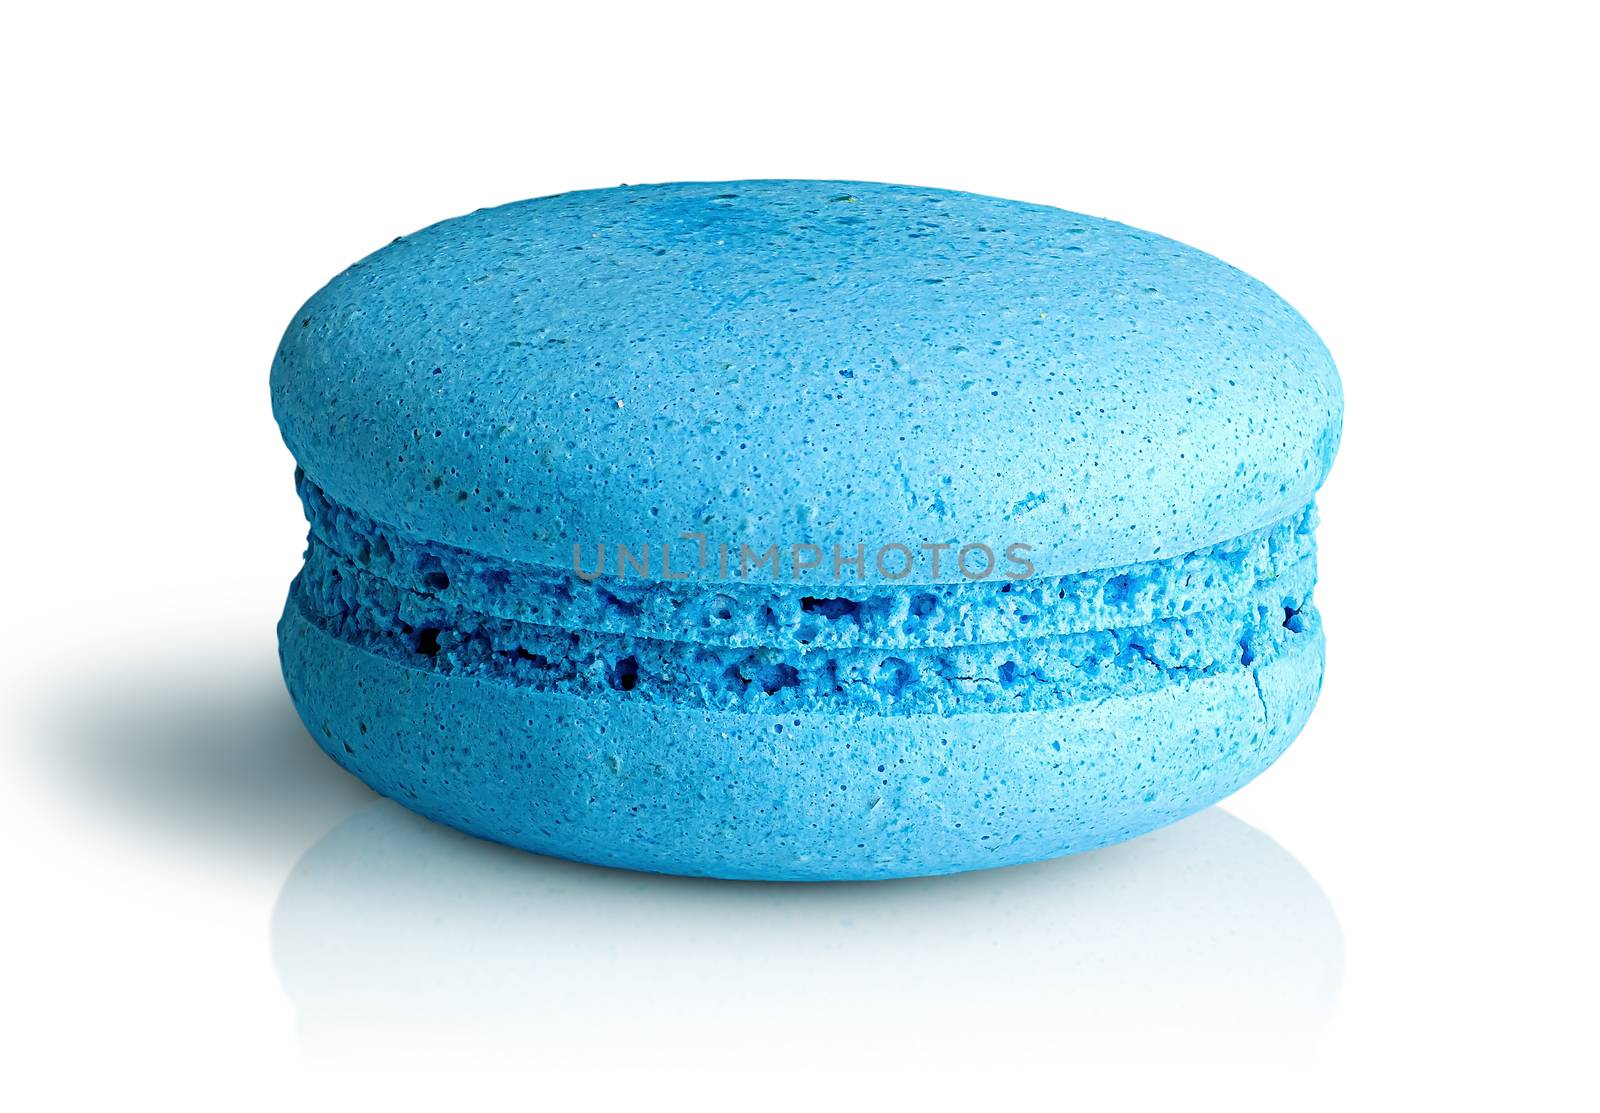 One blue macaroon front view by Cipariss